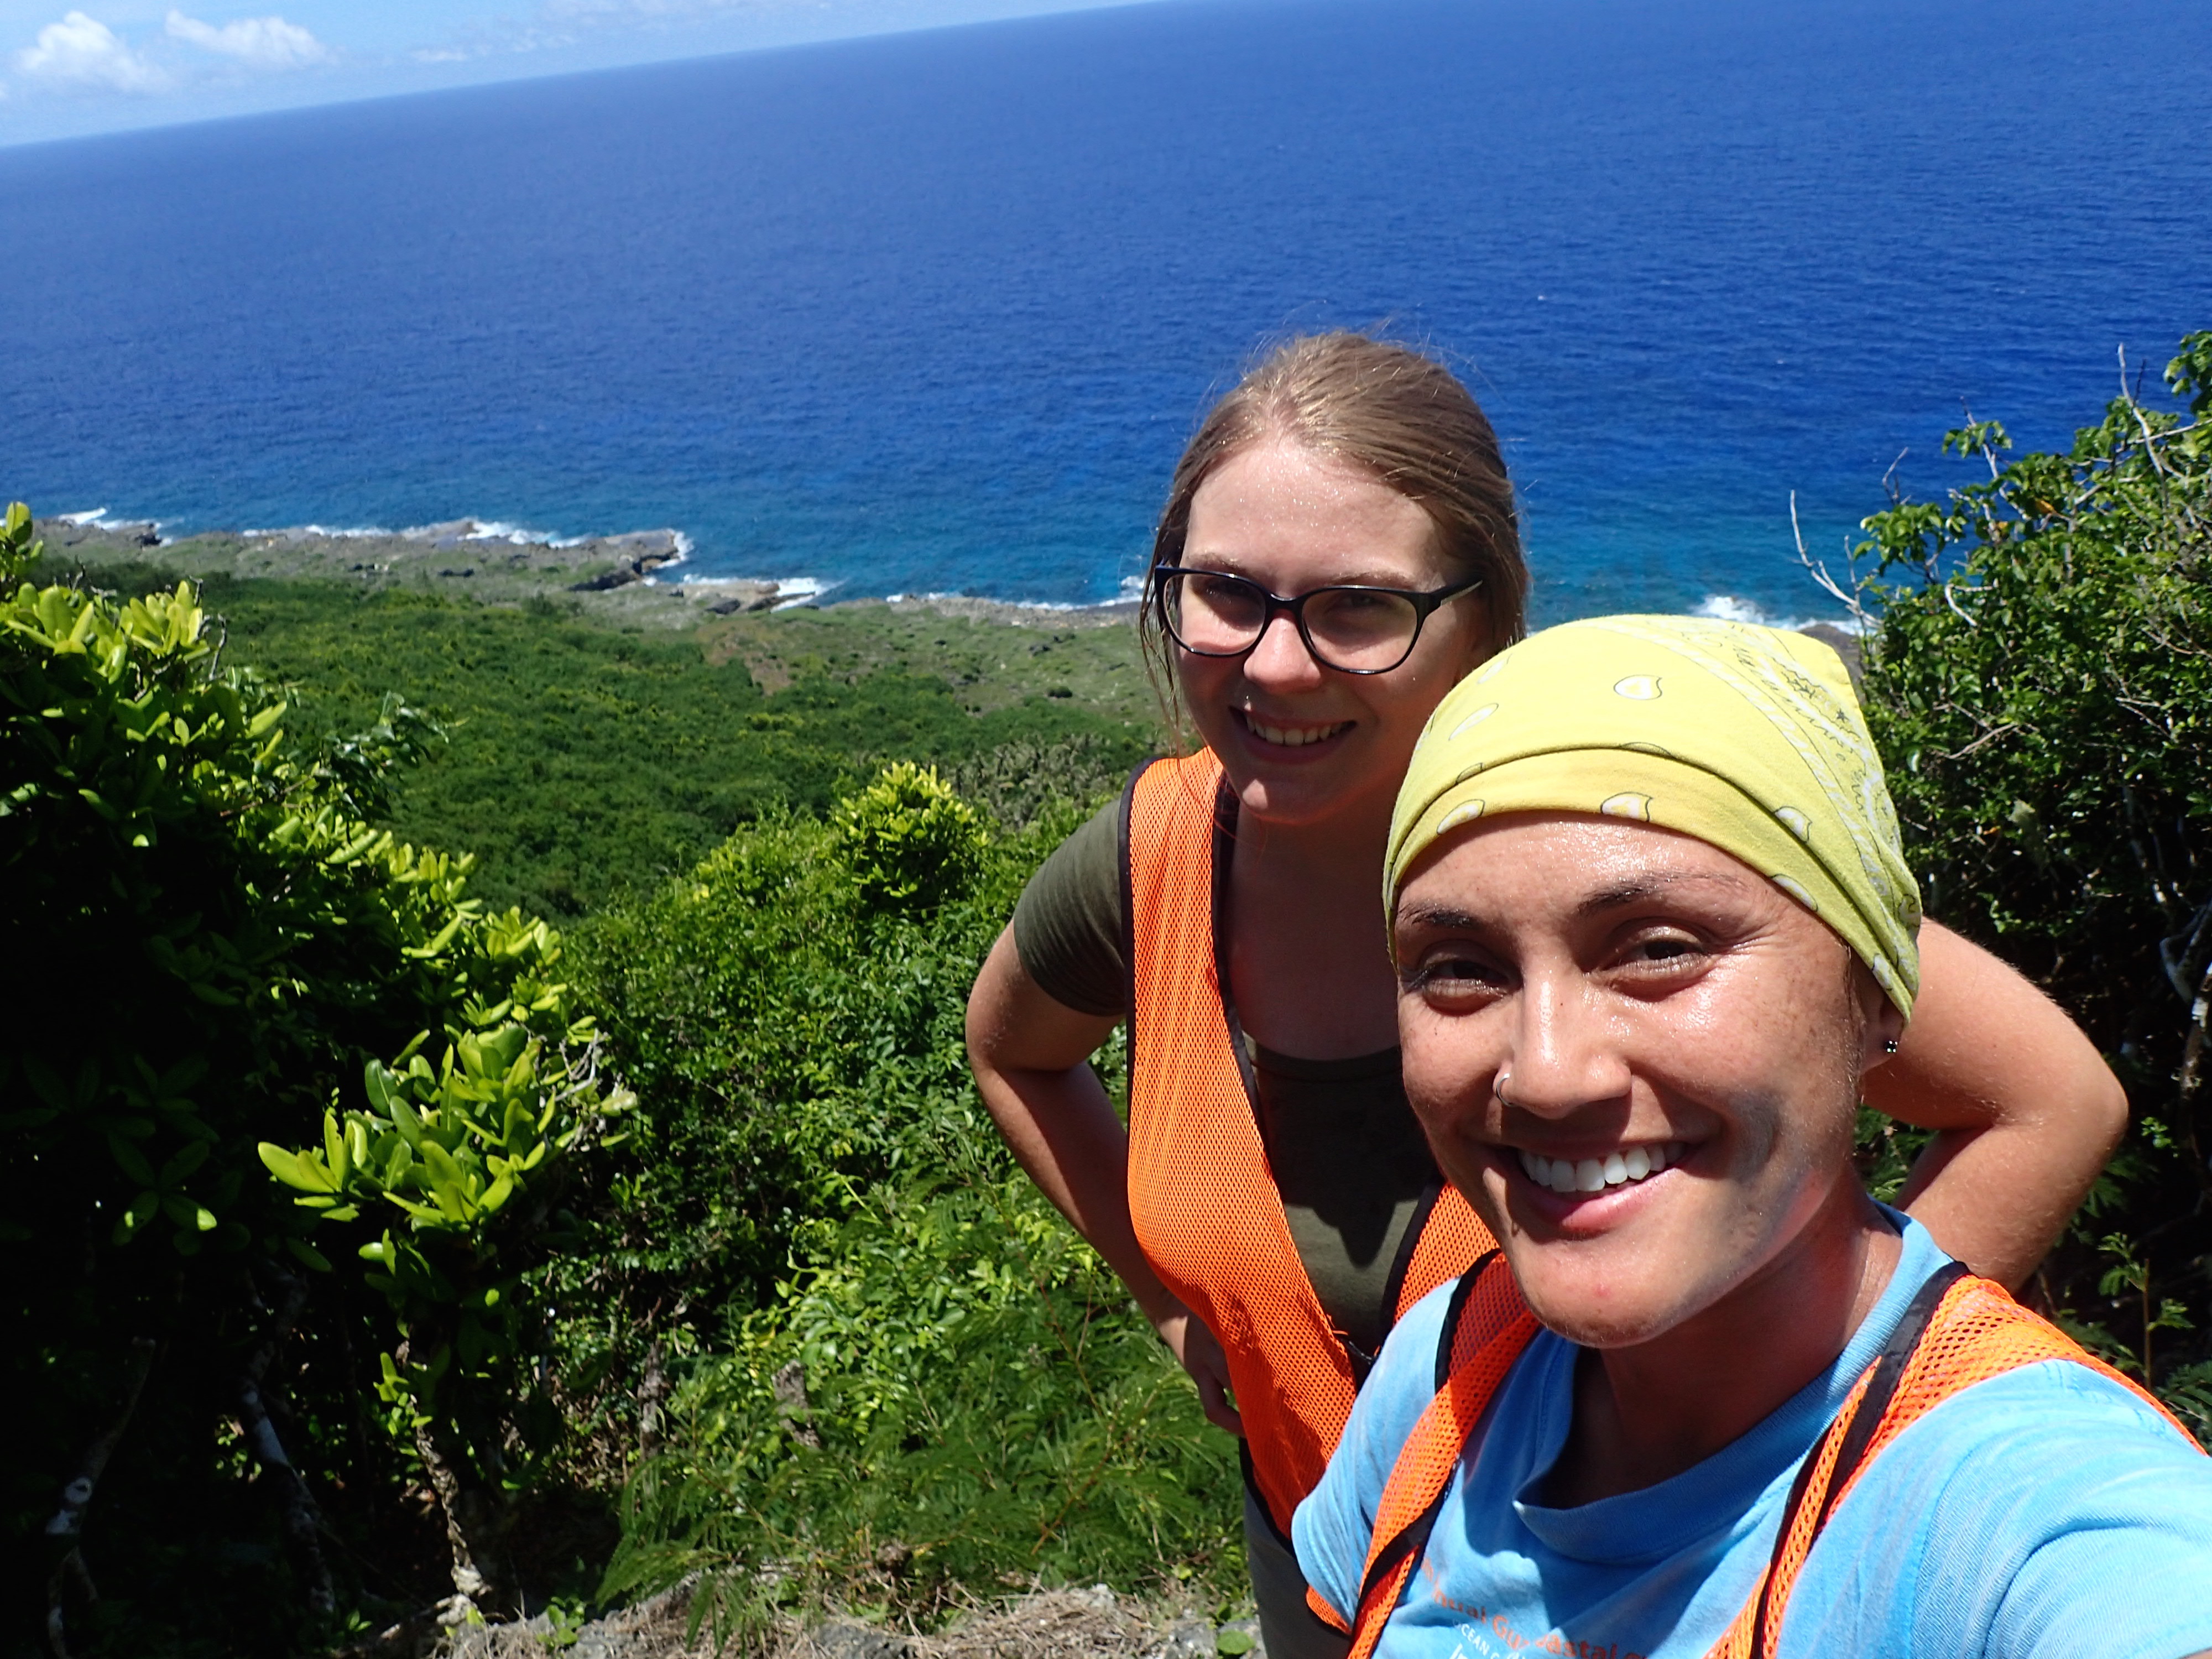 Two women stand in front of a cliff full of green vegetation, below and behind you can see the blue ocean.